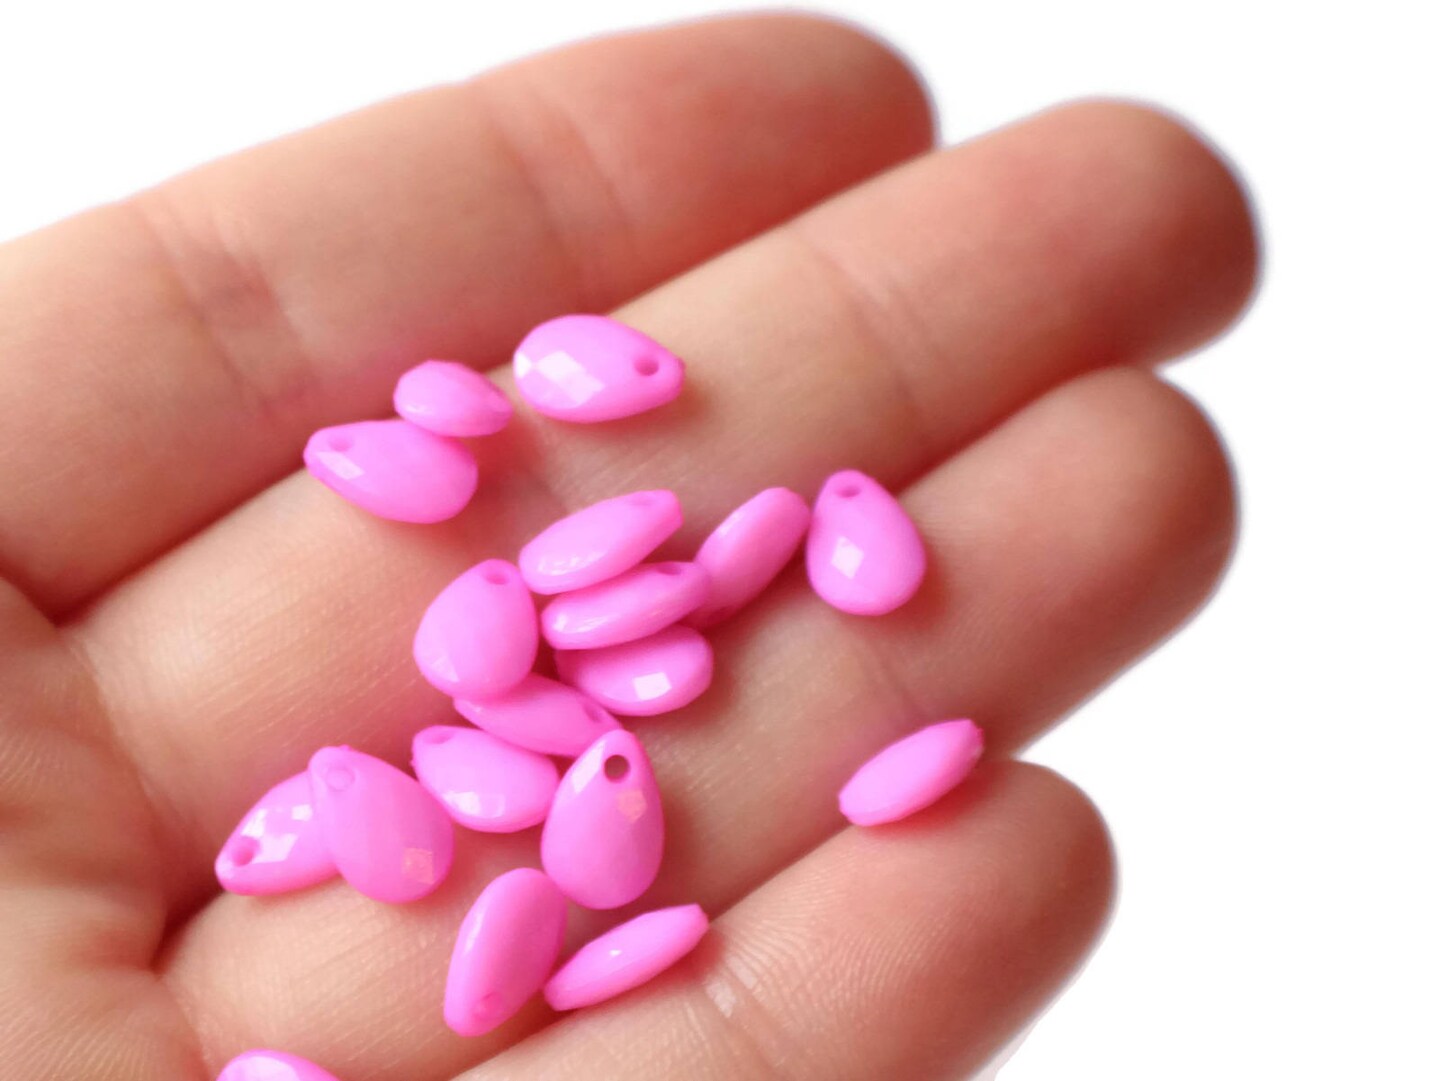 100 9mm Bubblegum Pink Briolette Beads Faceted Teardrops Plastic Beads to String Drop Charms